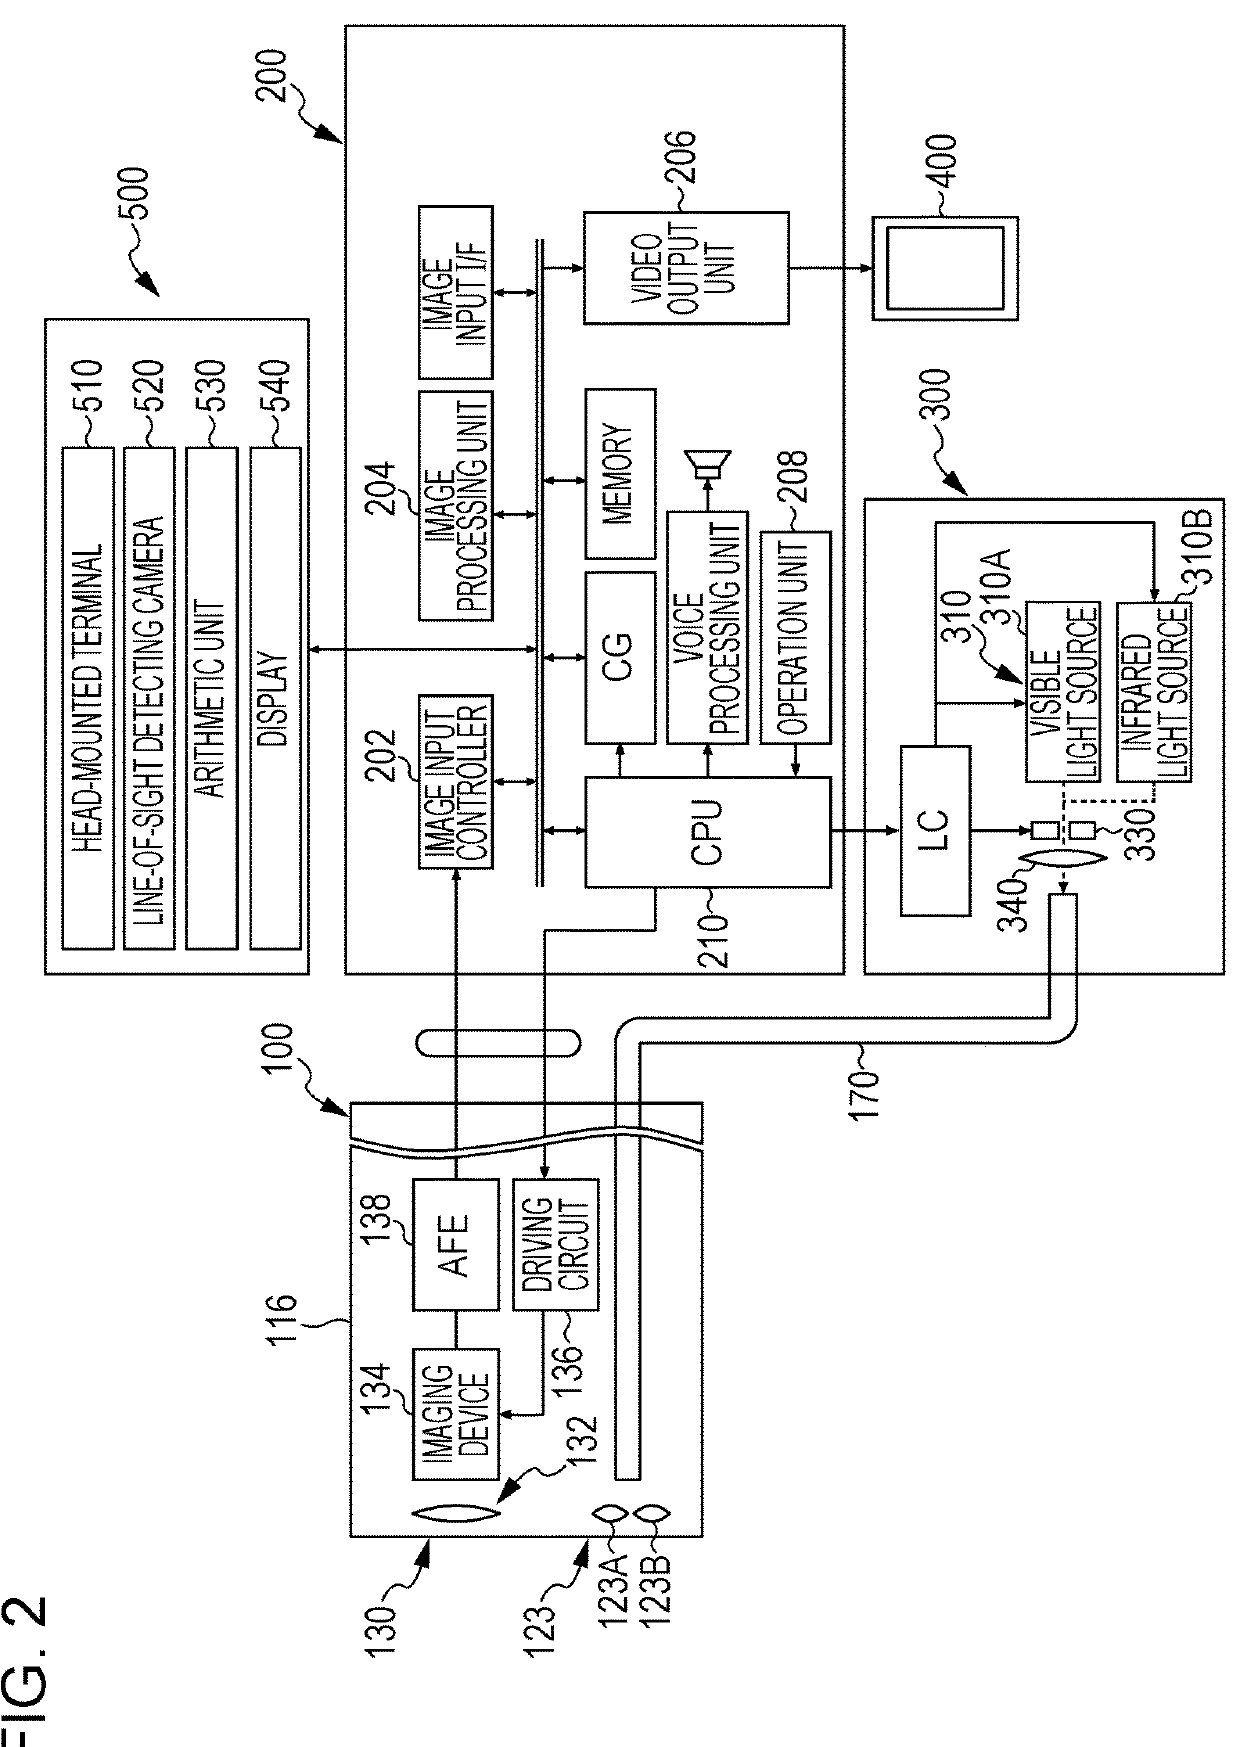 Apparatus operation device, apparatus operation method, and electronic apparatus system